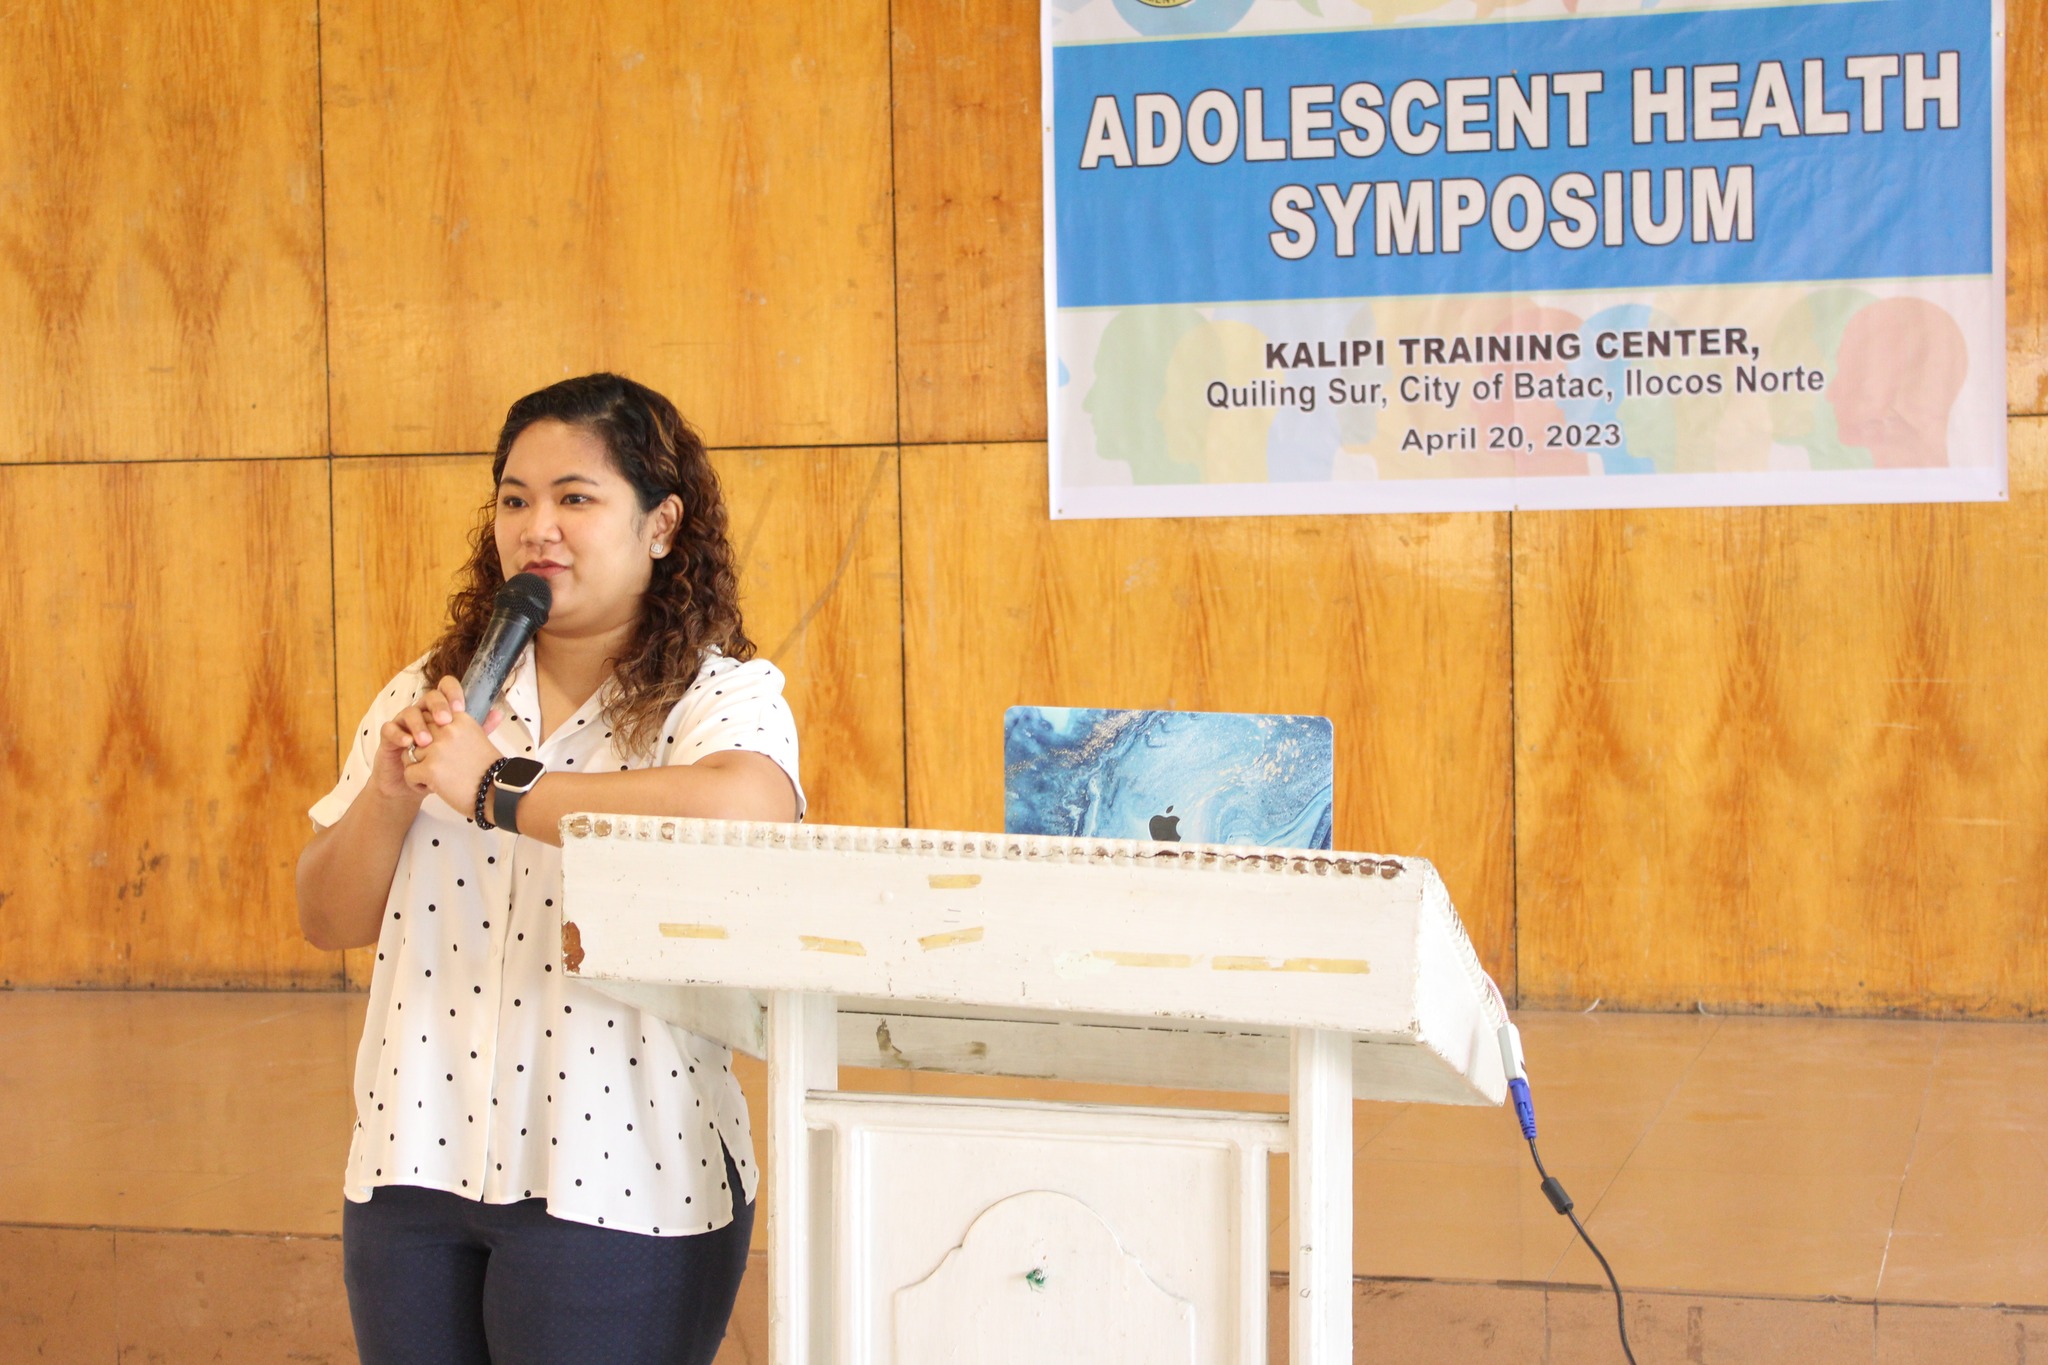 CGB-CHO CONDUCTS ADOLESCENT HEALTH SYMPOSIUM FOR SECONDARY SCHOOL STUDENTS